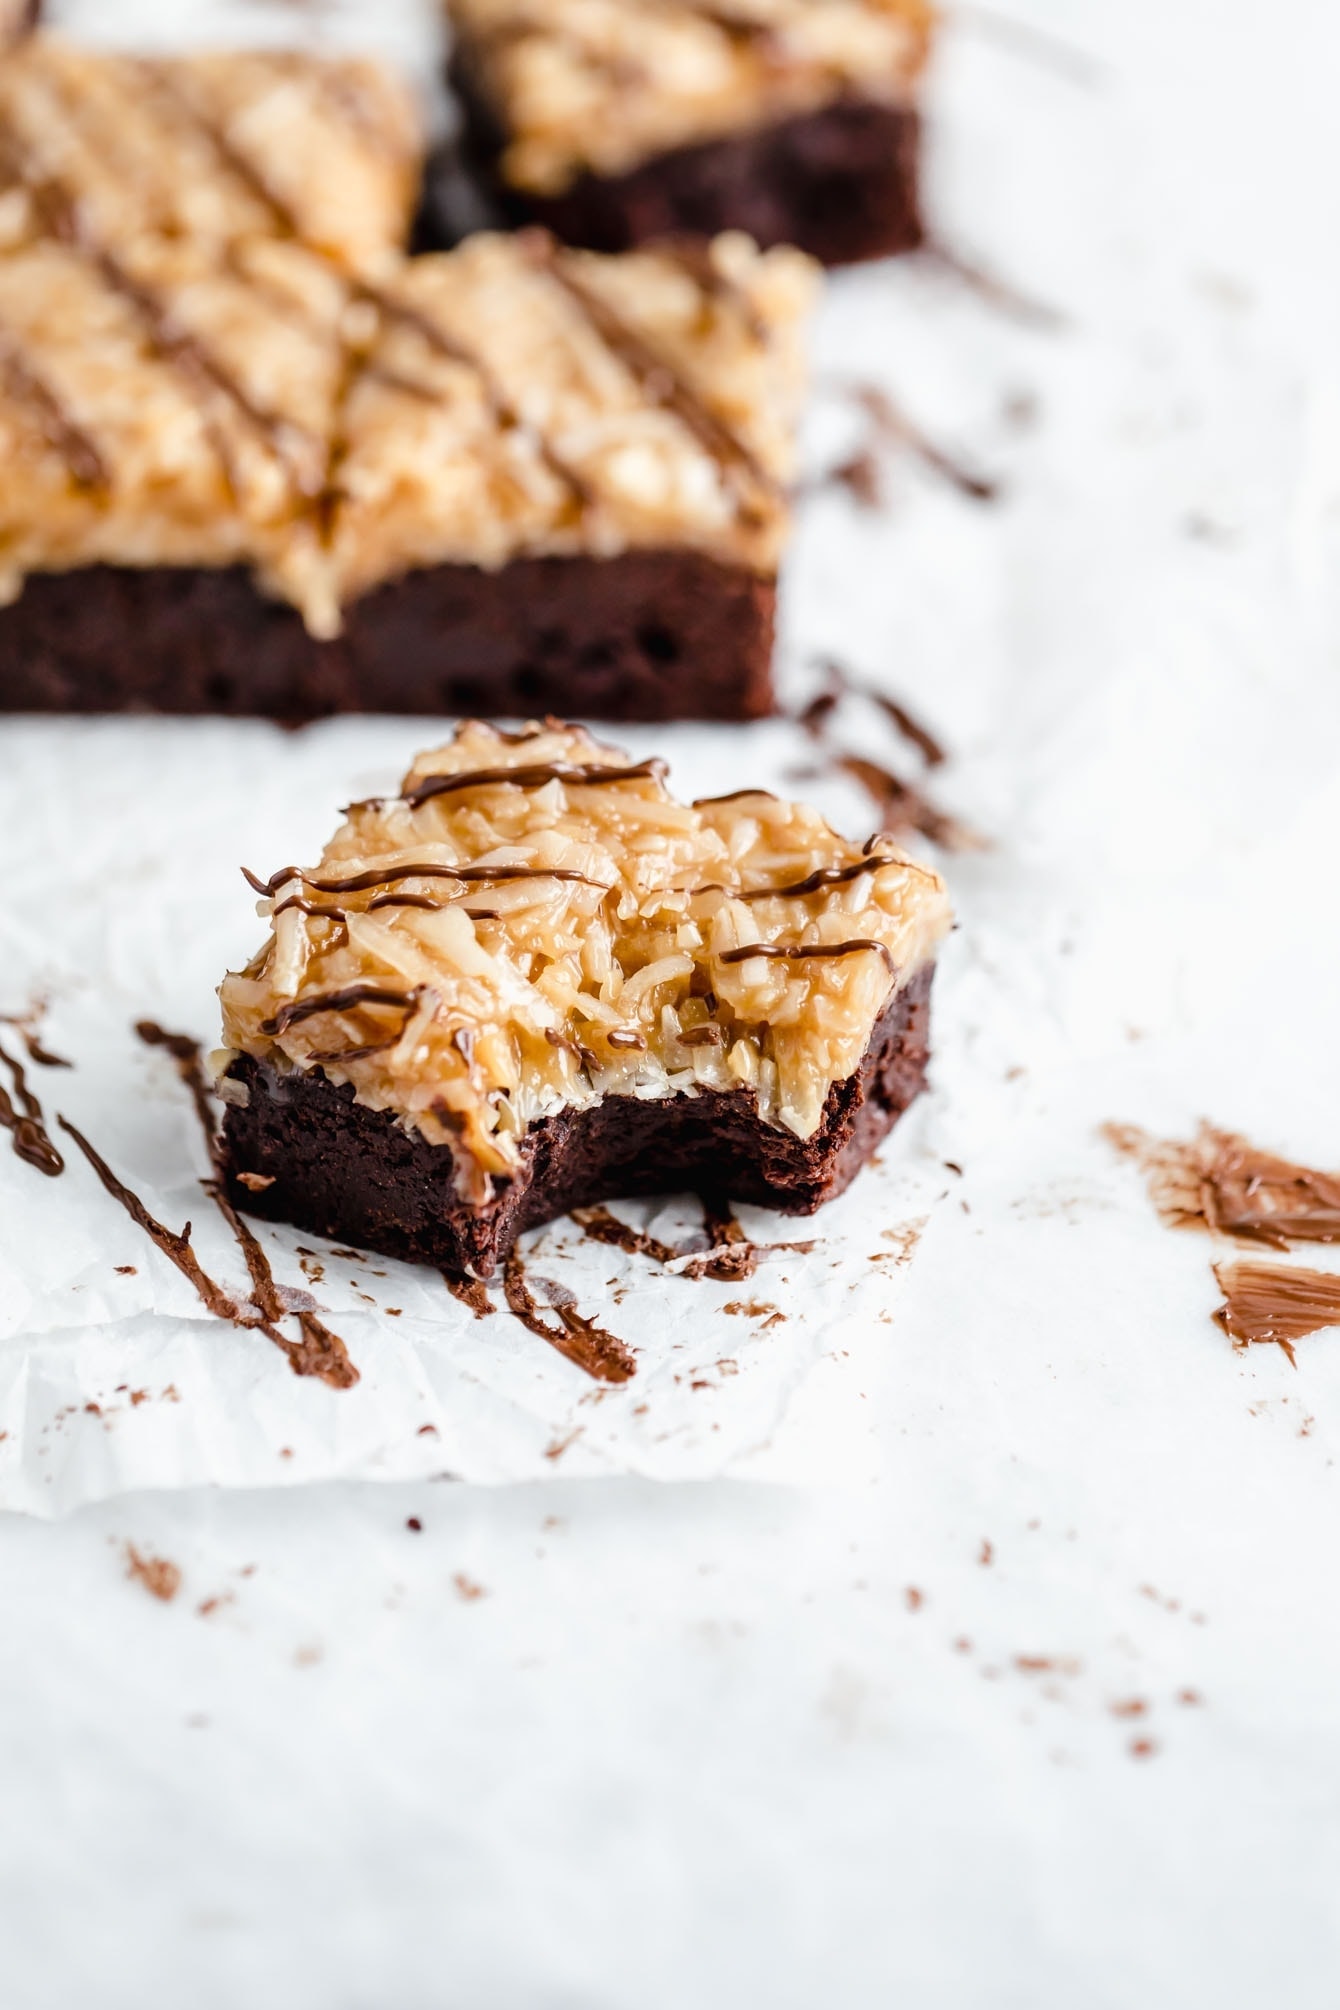 These Samoa brownies are fudgy brownies topped with homemade coconut caramel sauce and drizzled with chocolate. Perfect for any Girl Scout cookie lover!